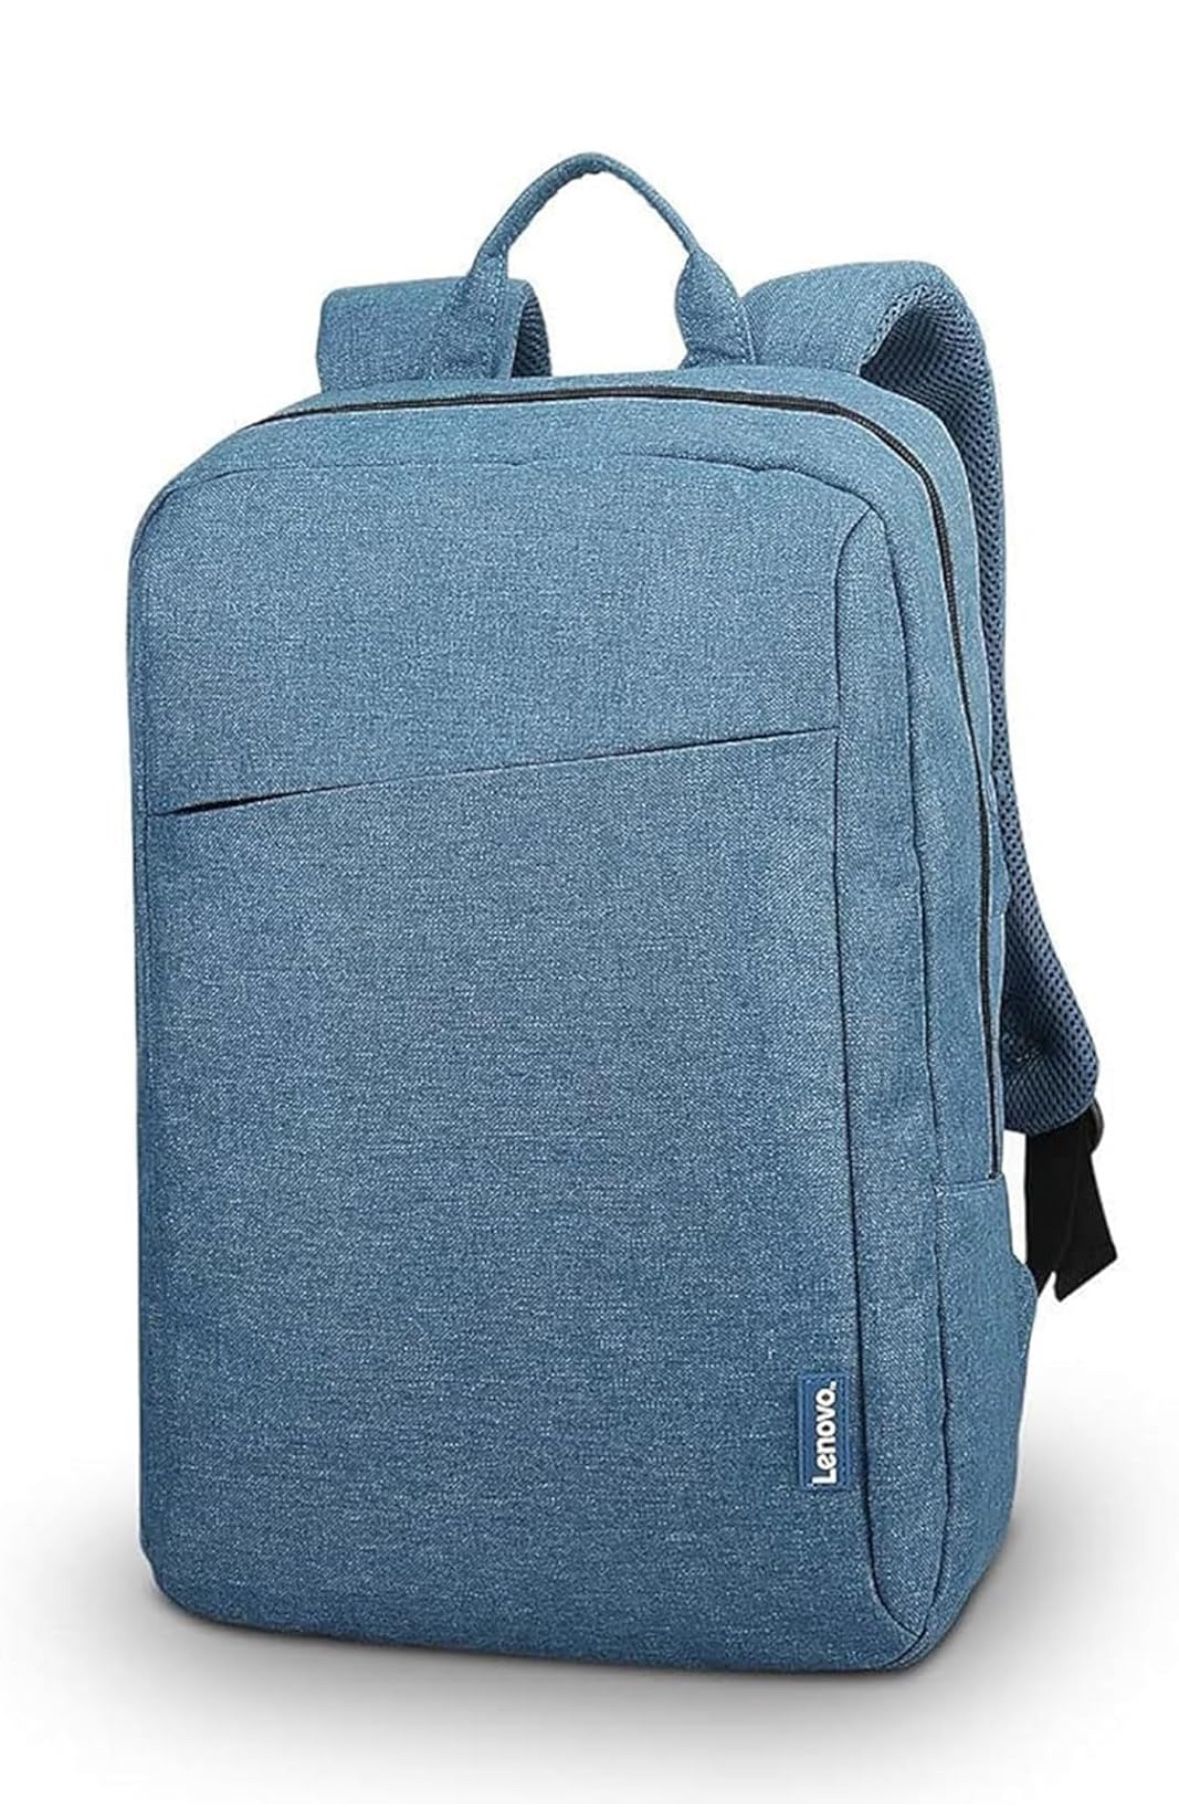 Lenovo Casual Laptop Backpack B210 - 15.6 inch - Padded Laptop/Tablet Compartment - Durable and Water-Repellent Fabric - Lightweight - Blue